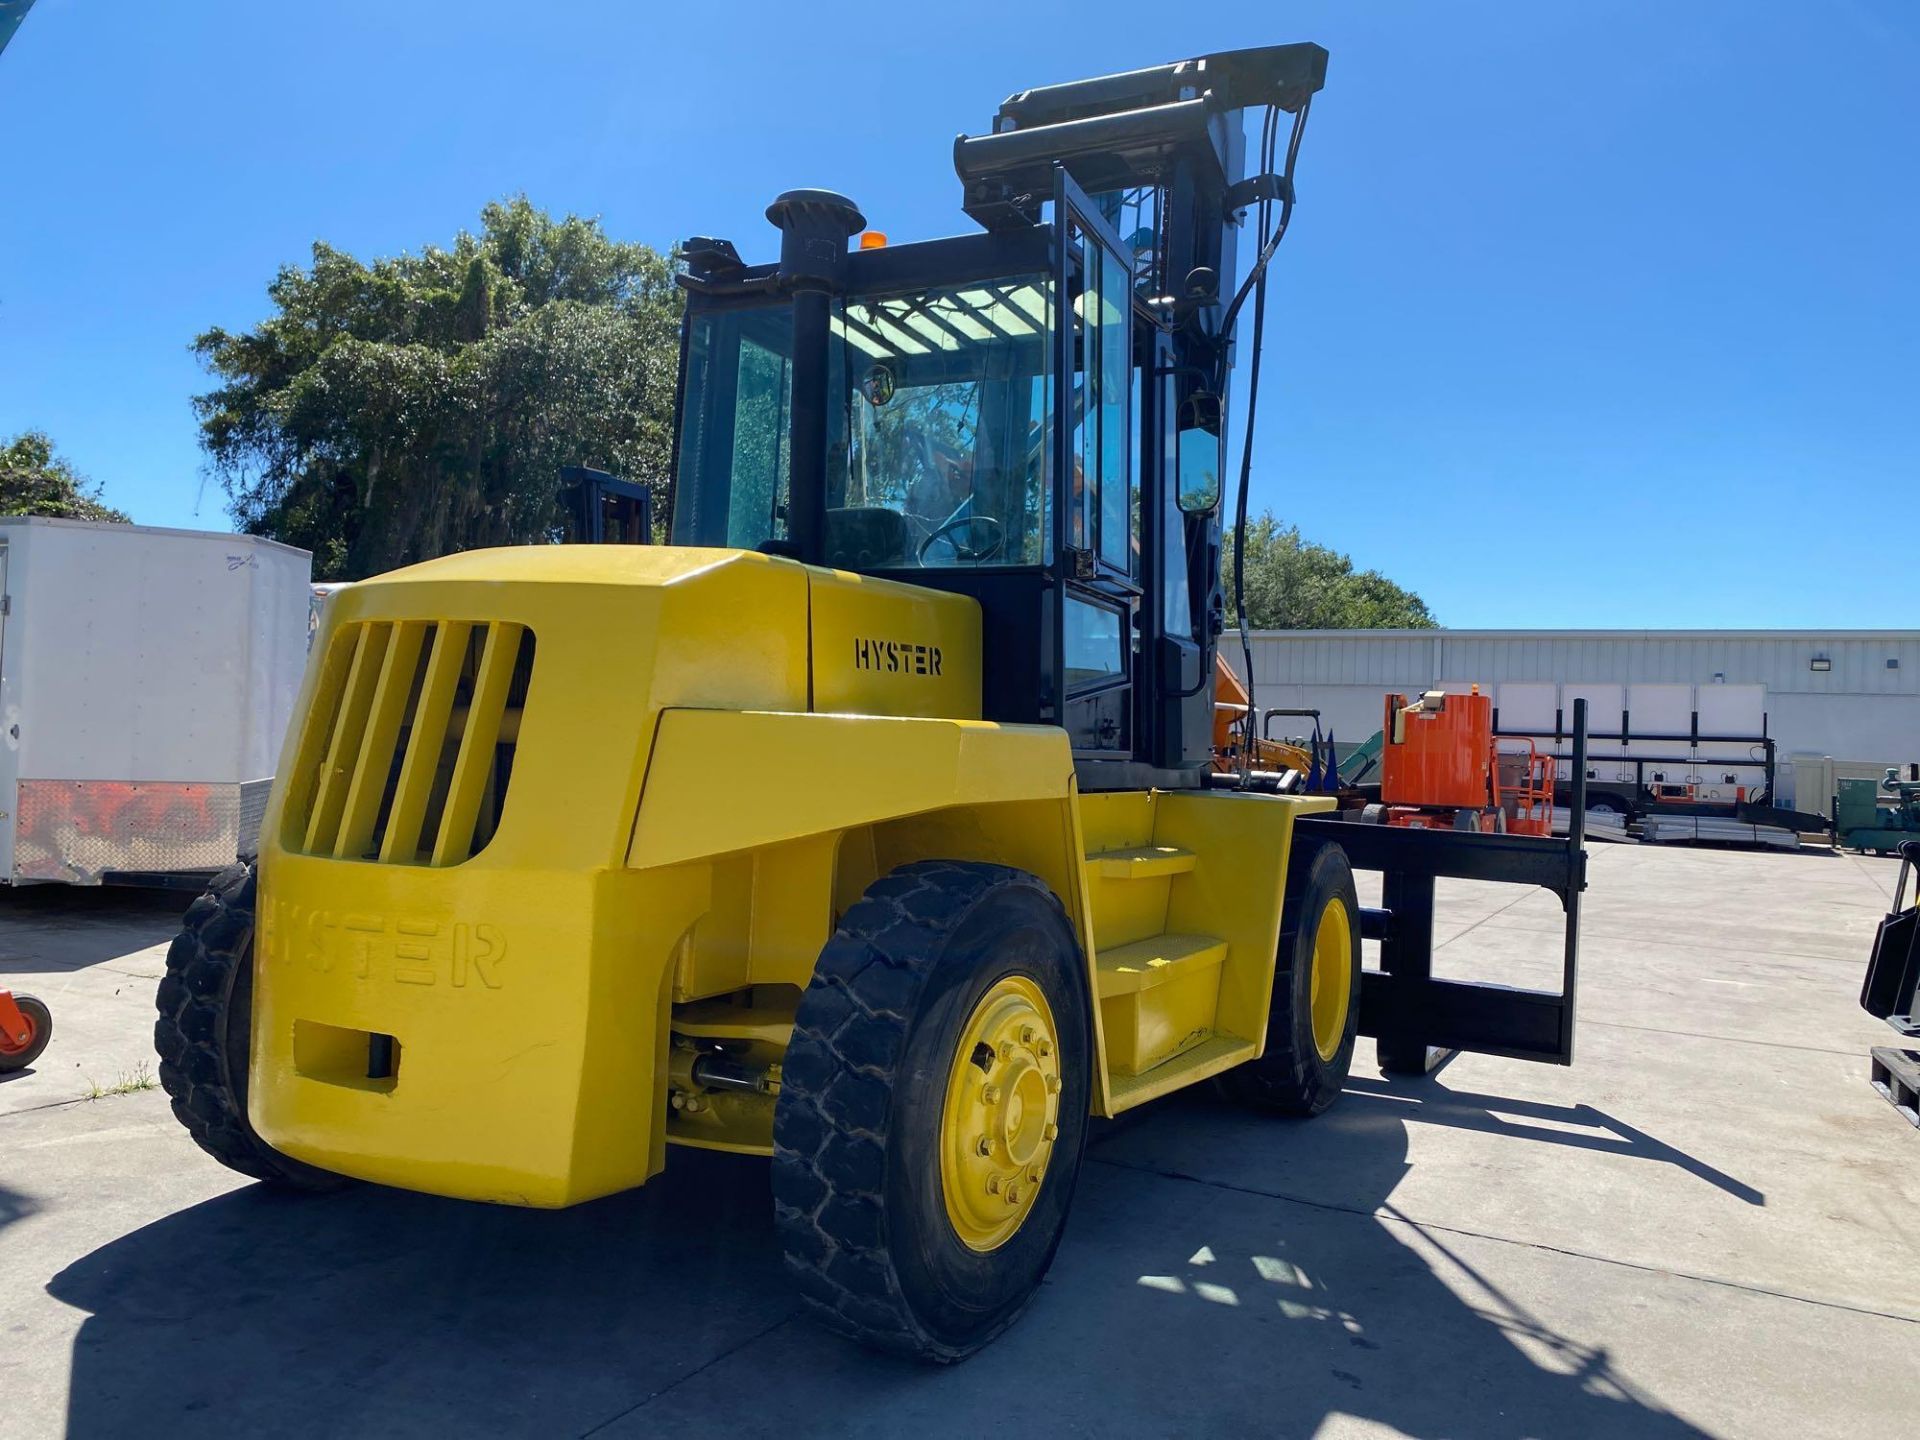 HYSTER DIESEL FORKLIFT MODEL H190XL2, APPROX. 19,000 LB CAPACITY, 212.6" HEIGHT CAPACITY, RUNS AND O - Image 4 of 12